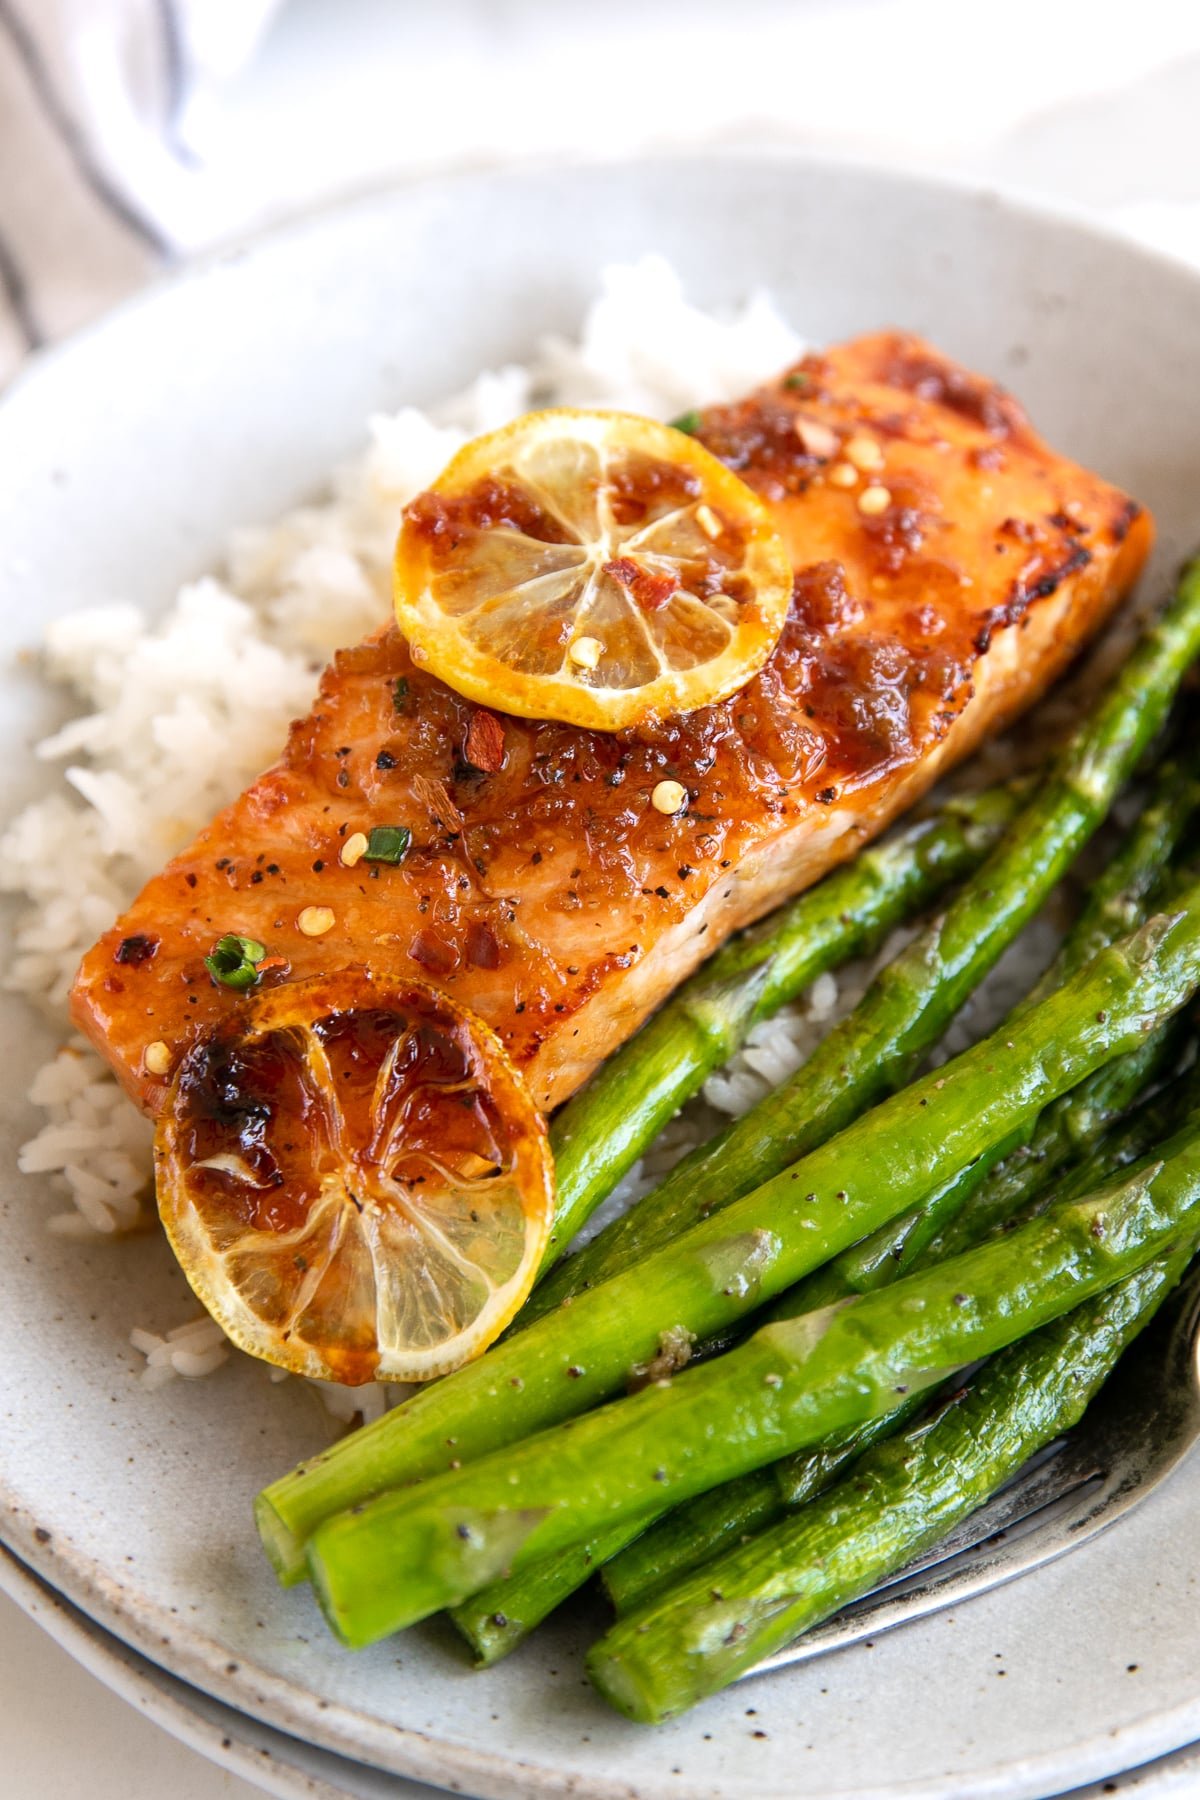 Medium sized dinner plate filed with white rice, cooked asparagus, and one salmon fillet covered in a honey garlic sauce.